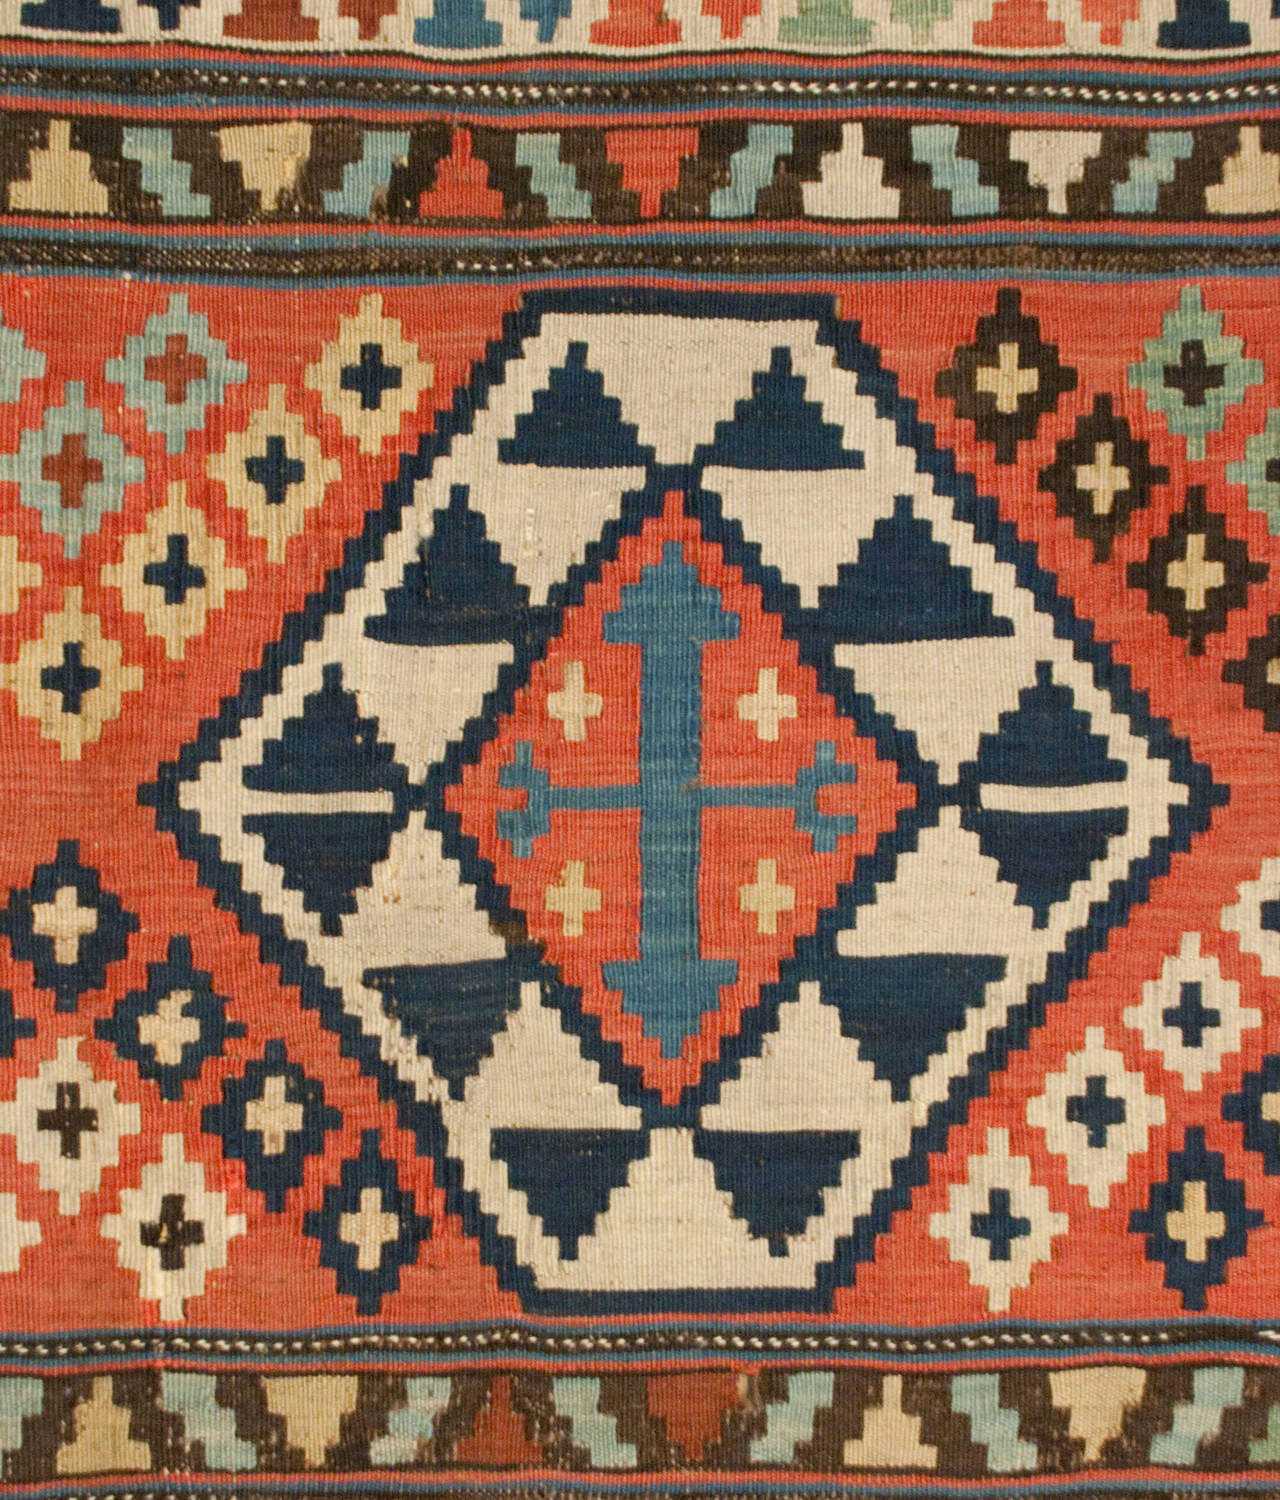 An exceptional 19th century Persian Shriven Kilim rug with a bold pattern of alternating multicolored stripes.